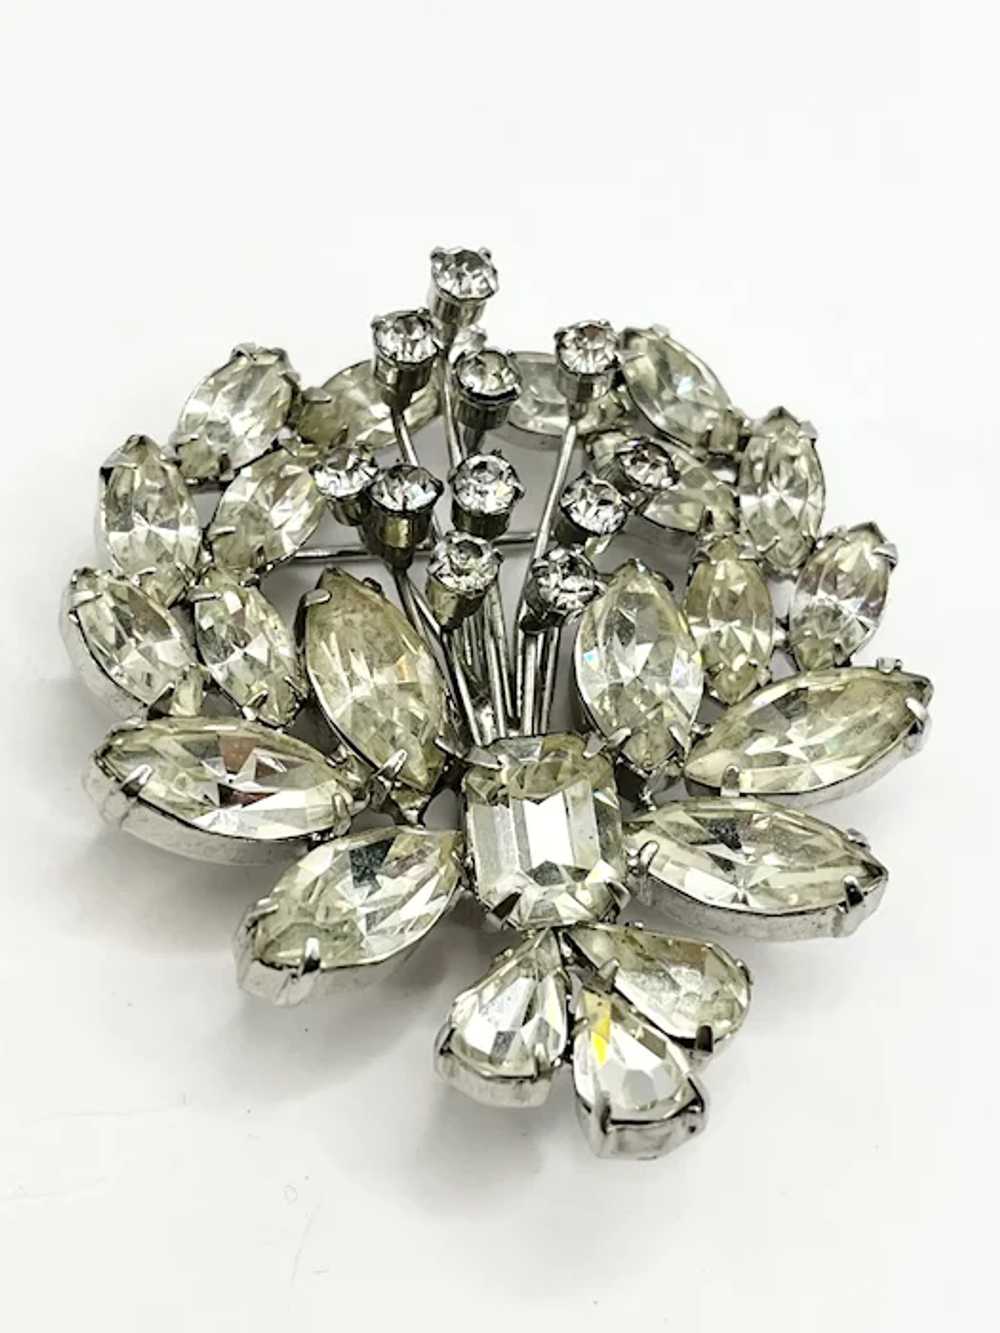 Vintage Signed Weiss Rhinestone Brooch pin - image 3